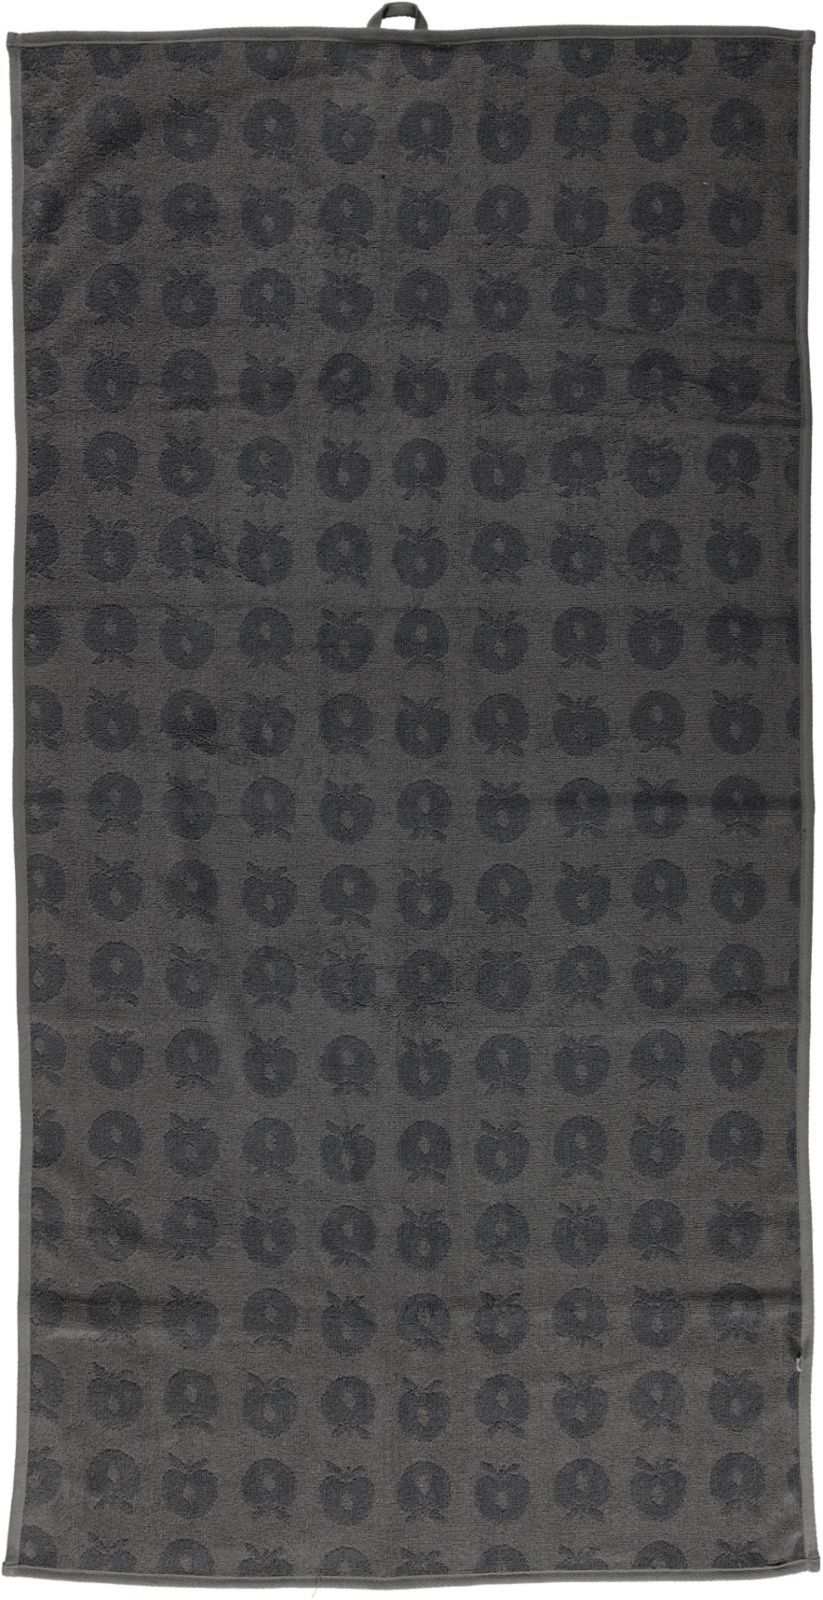 Towel 70x140 with Apples